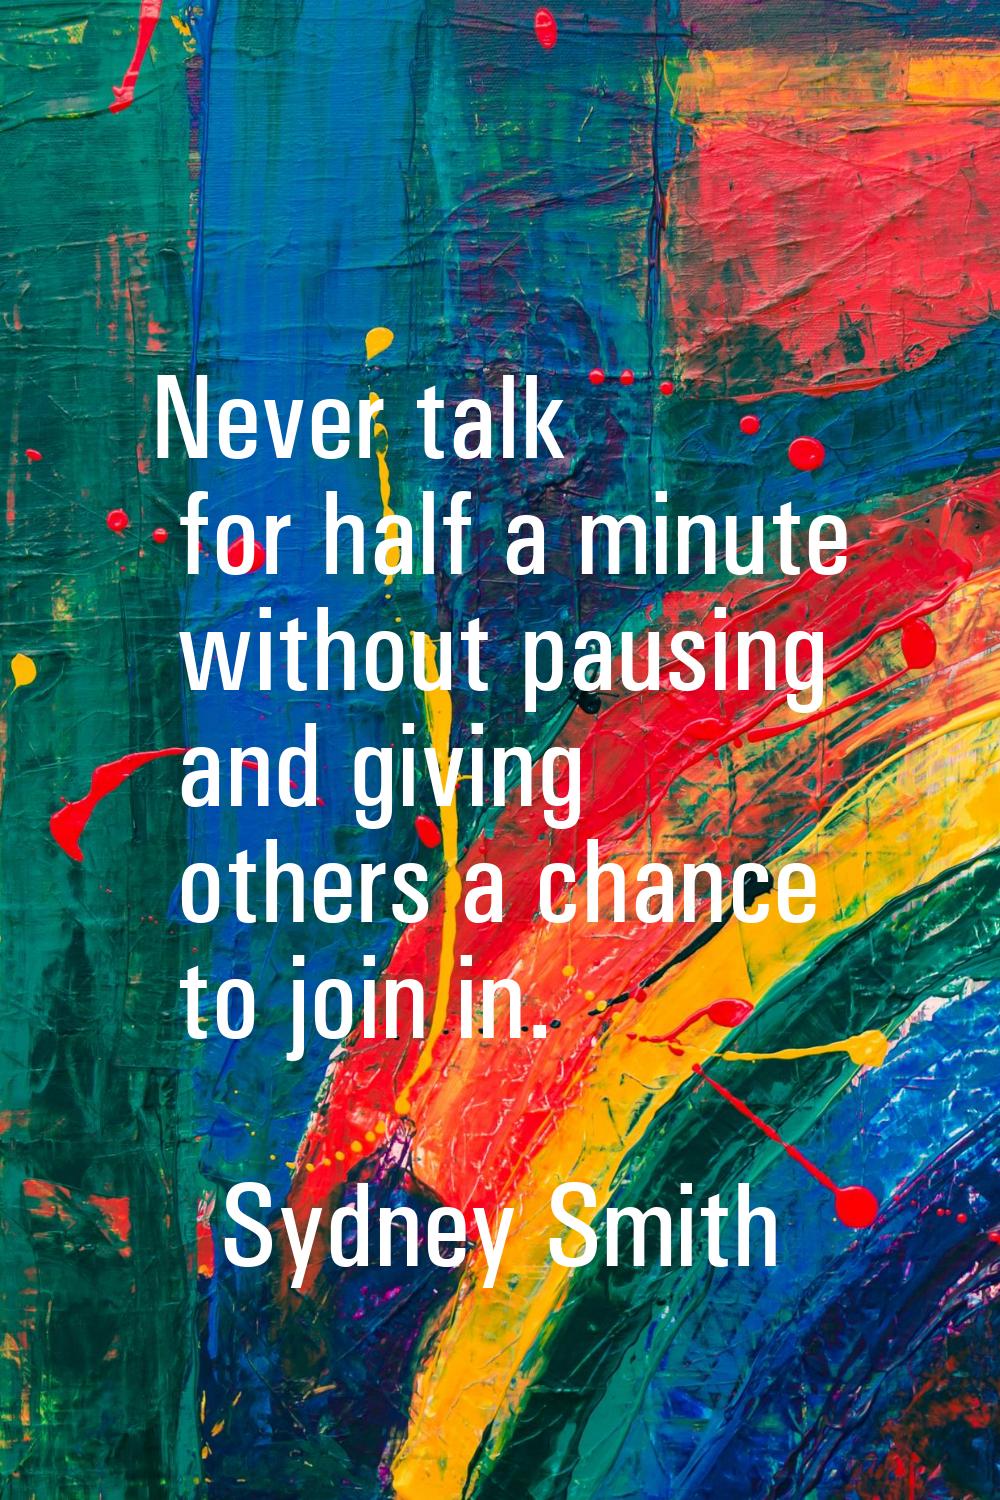 Never talk for half a minute without pausing and giving others a chance to join in.